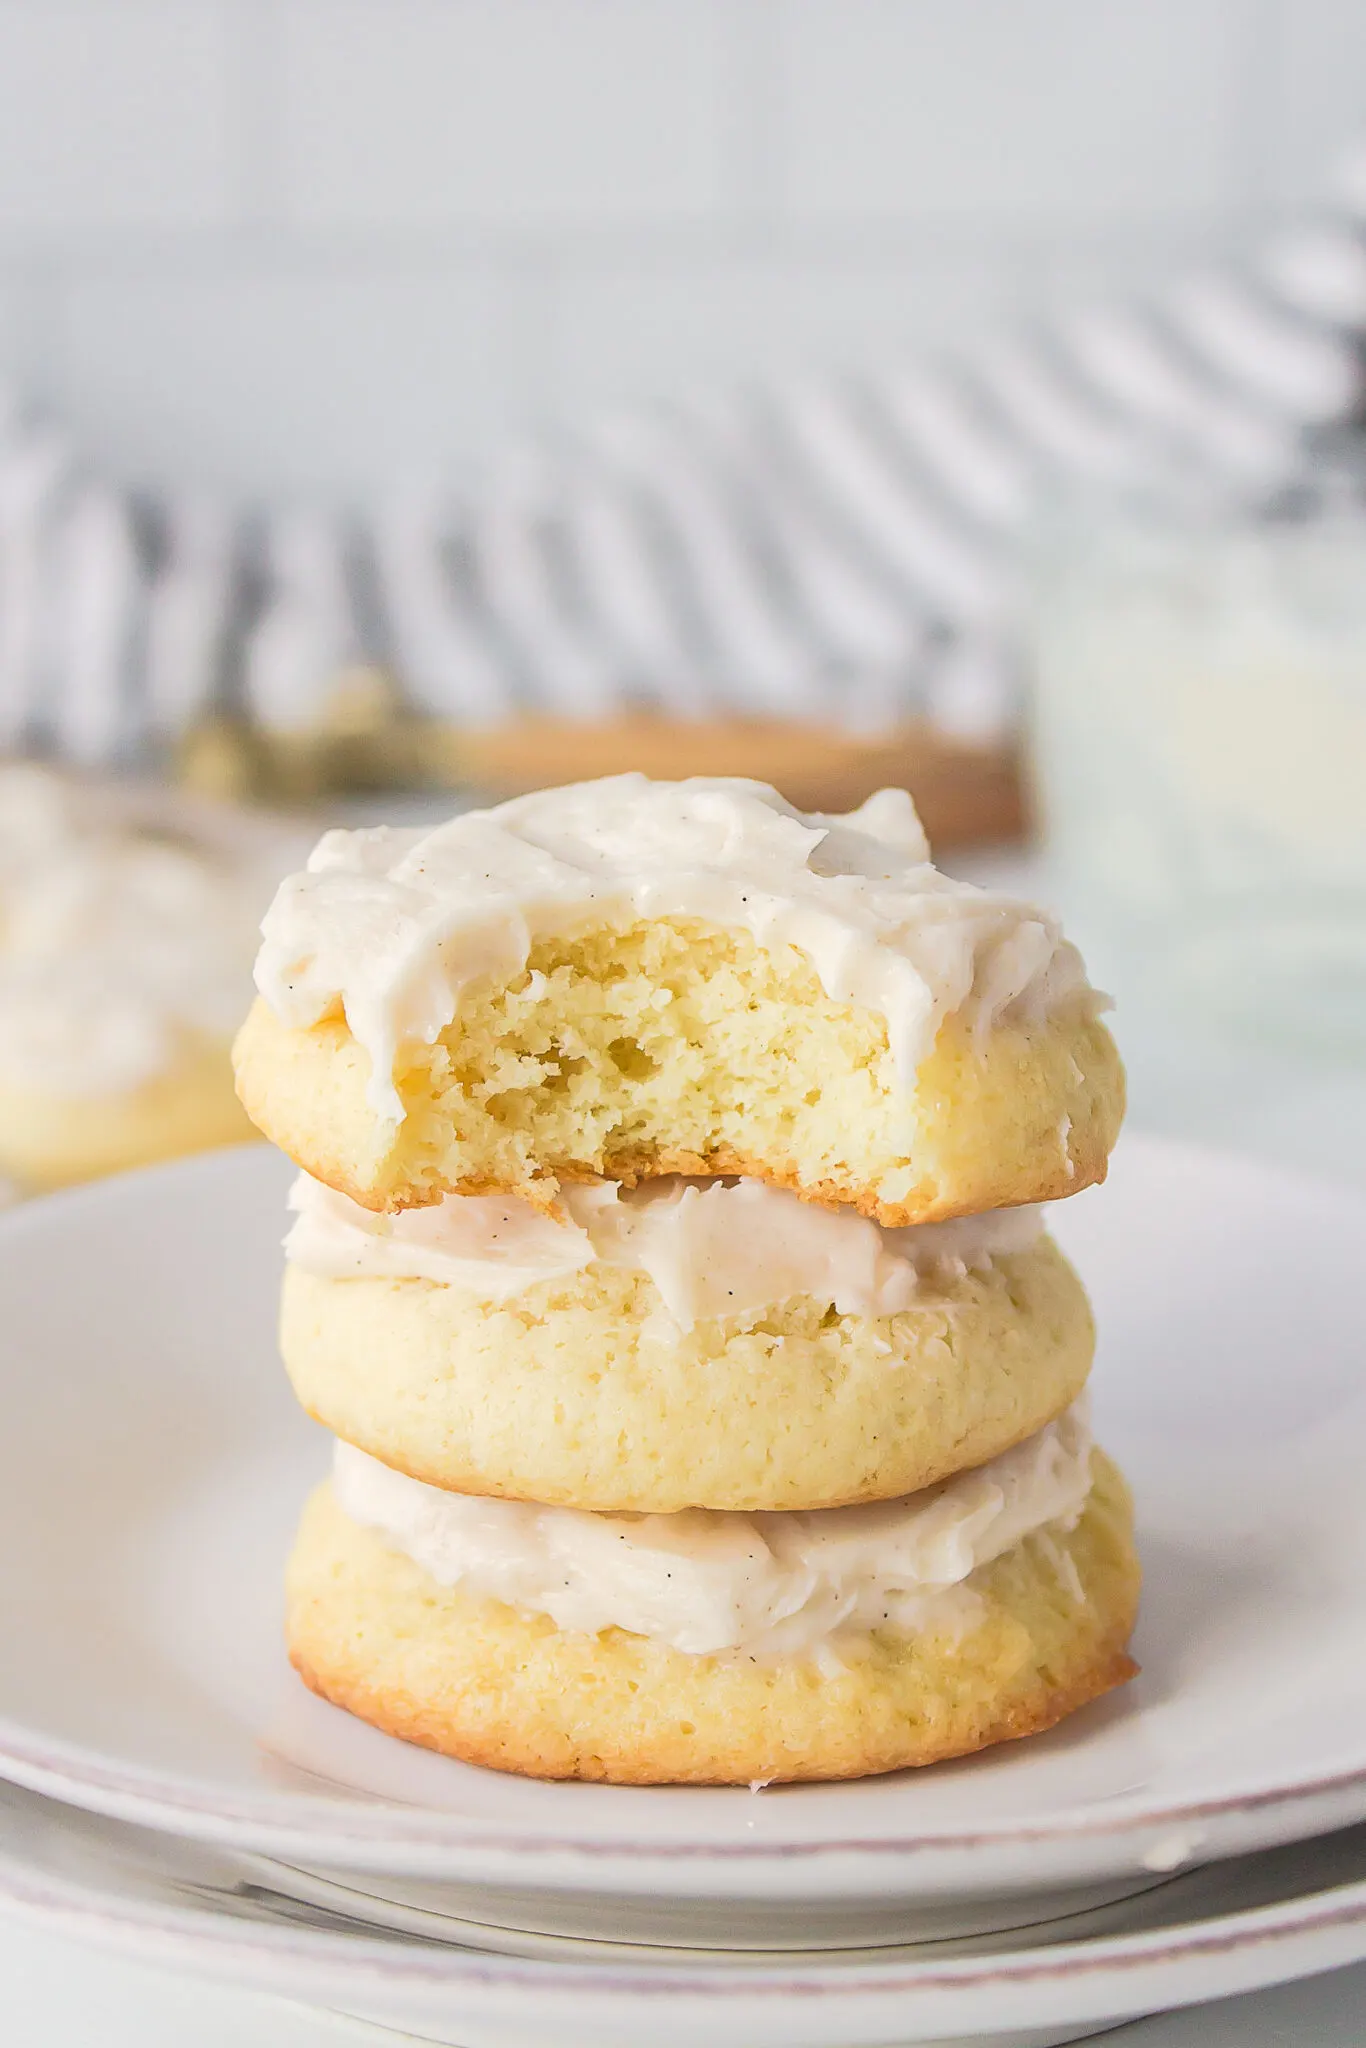 This photo shows 3 Old-Fashioned Sour Cream Cookies stacked on top of each other, with the top cooking showing the onside from a bite taken from the cookie. 